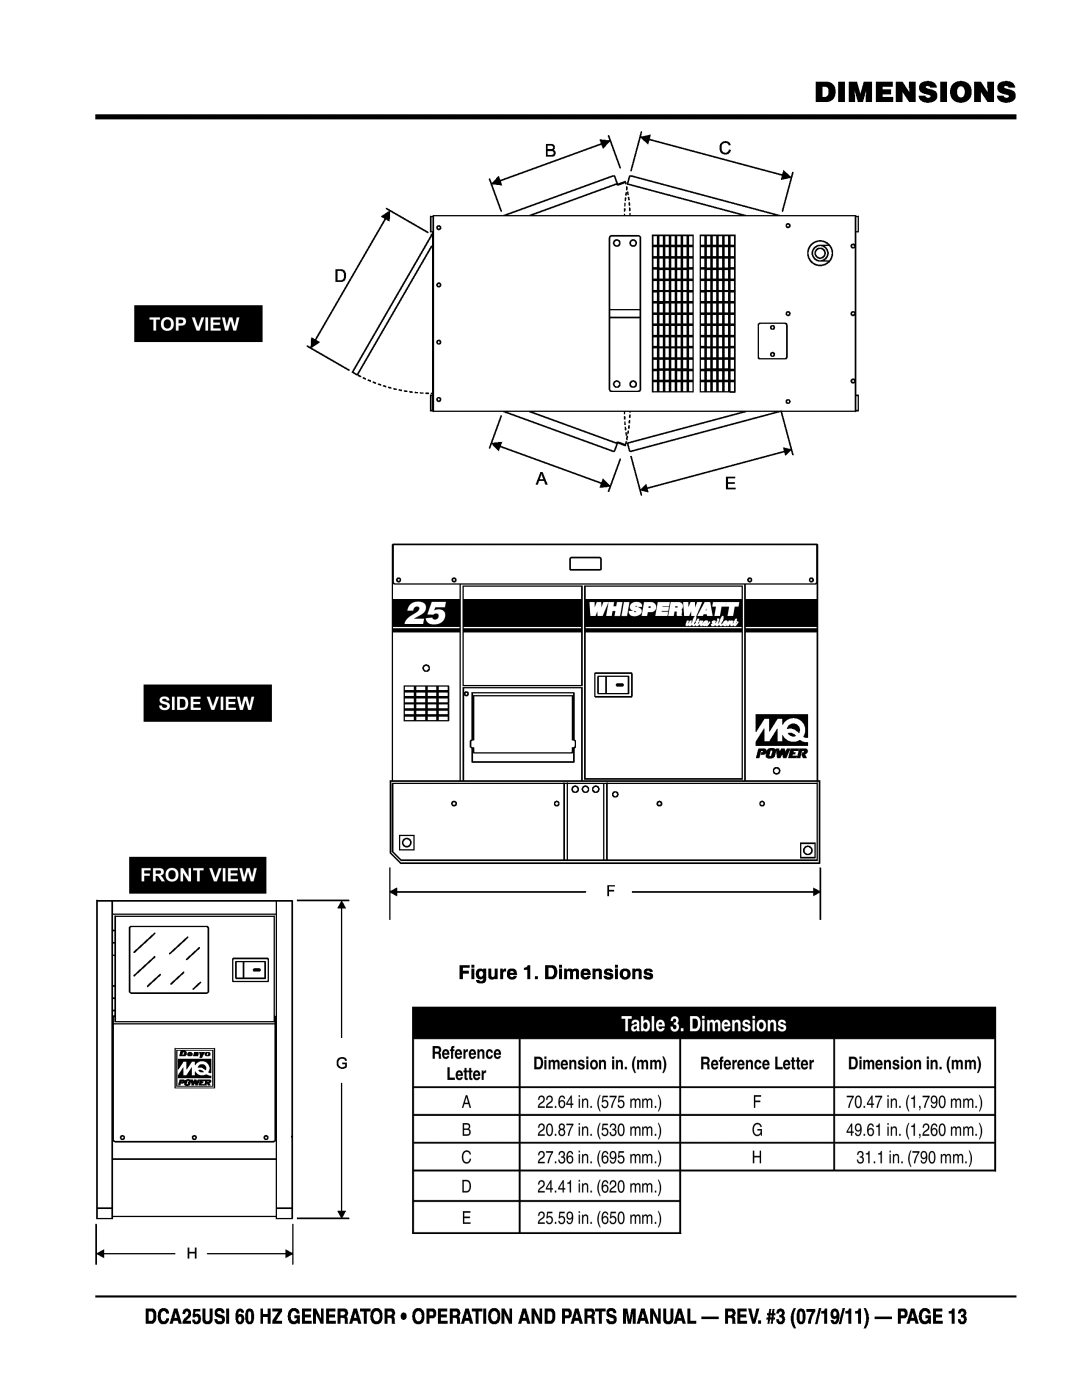 Multiquip DCA25USI manual Dimensions, Top View, Side View Front View, Bc D, A E 